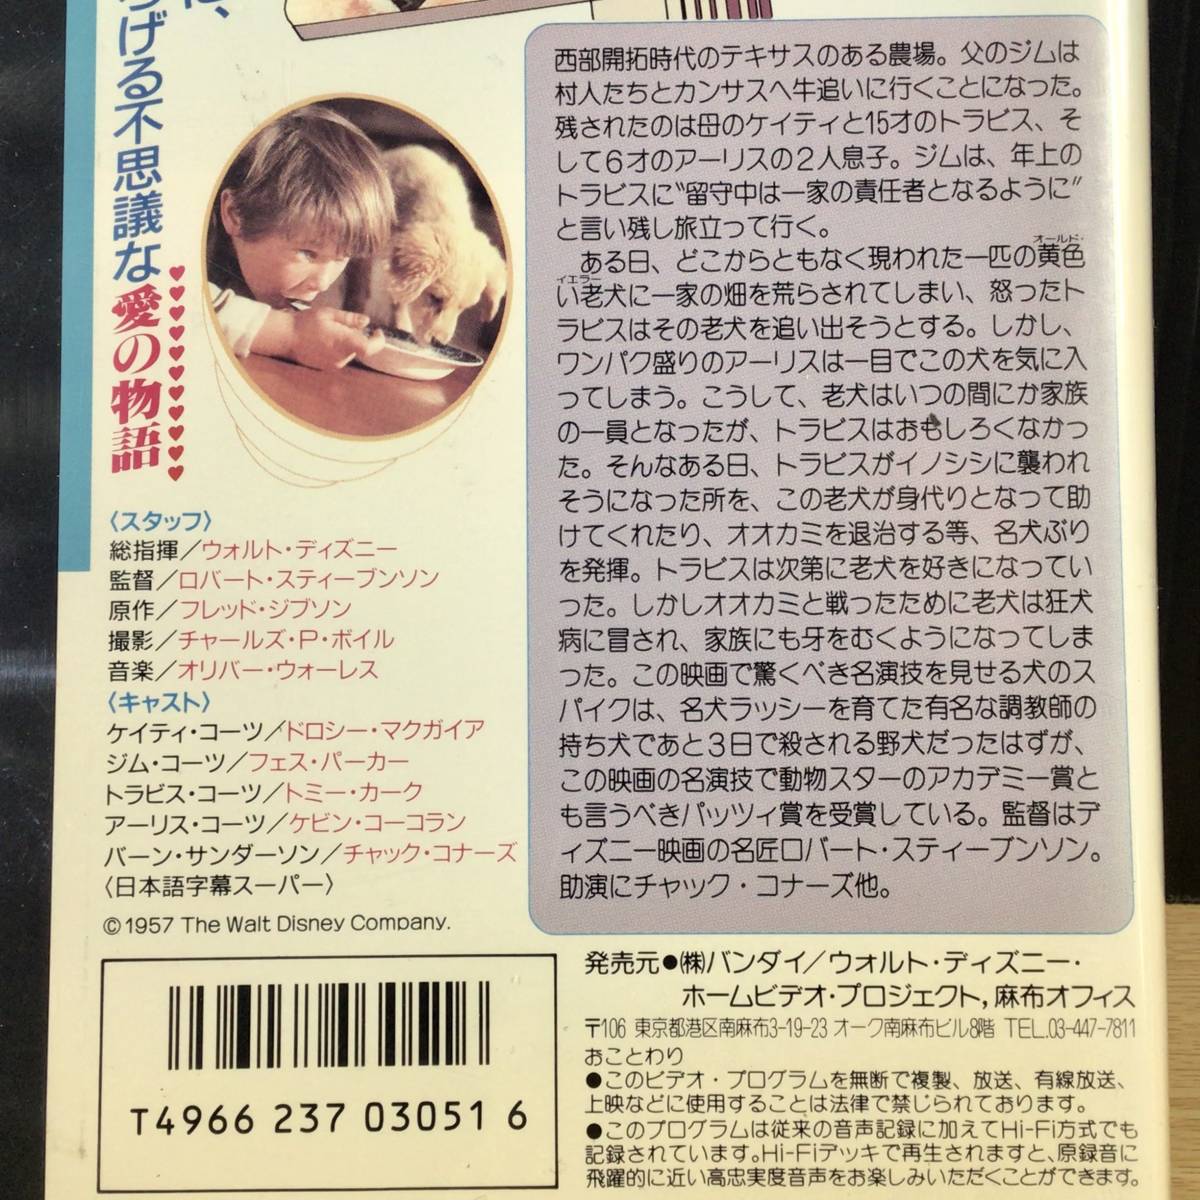 [ rental *VHS video soft ] yellow . dog, total finger .|uoruto* Disney, not yet DVD., historical name name work, Japanese title,1957 year America movie 